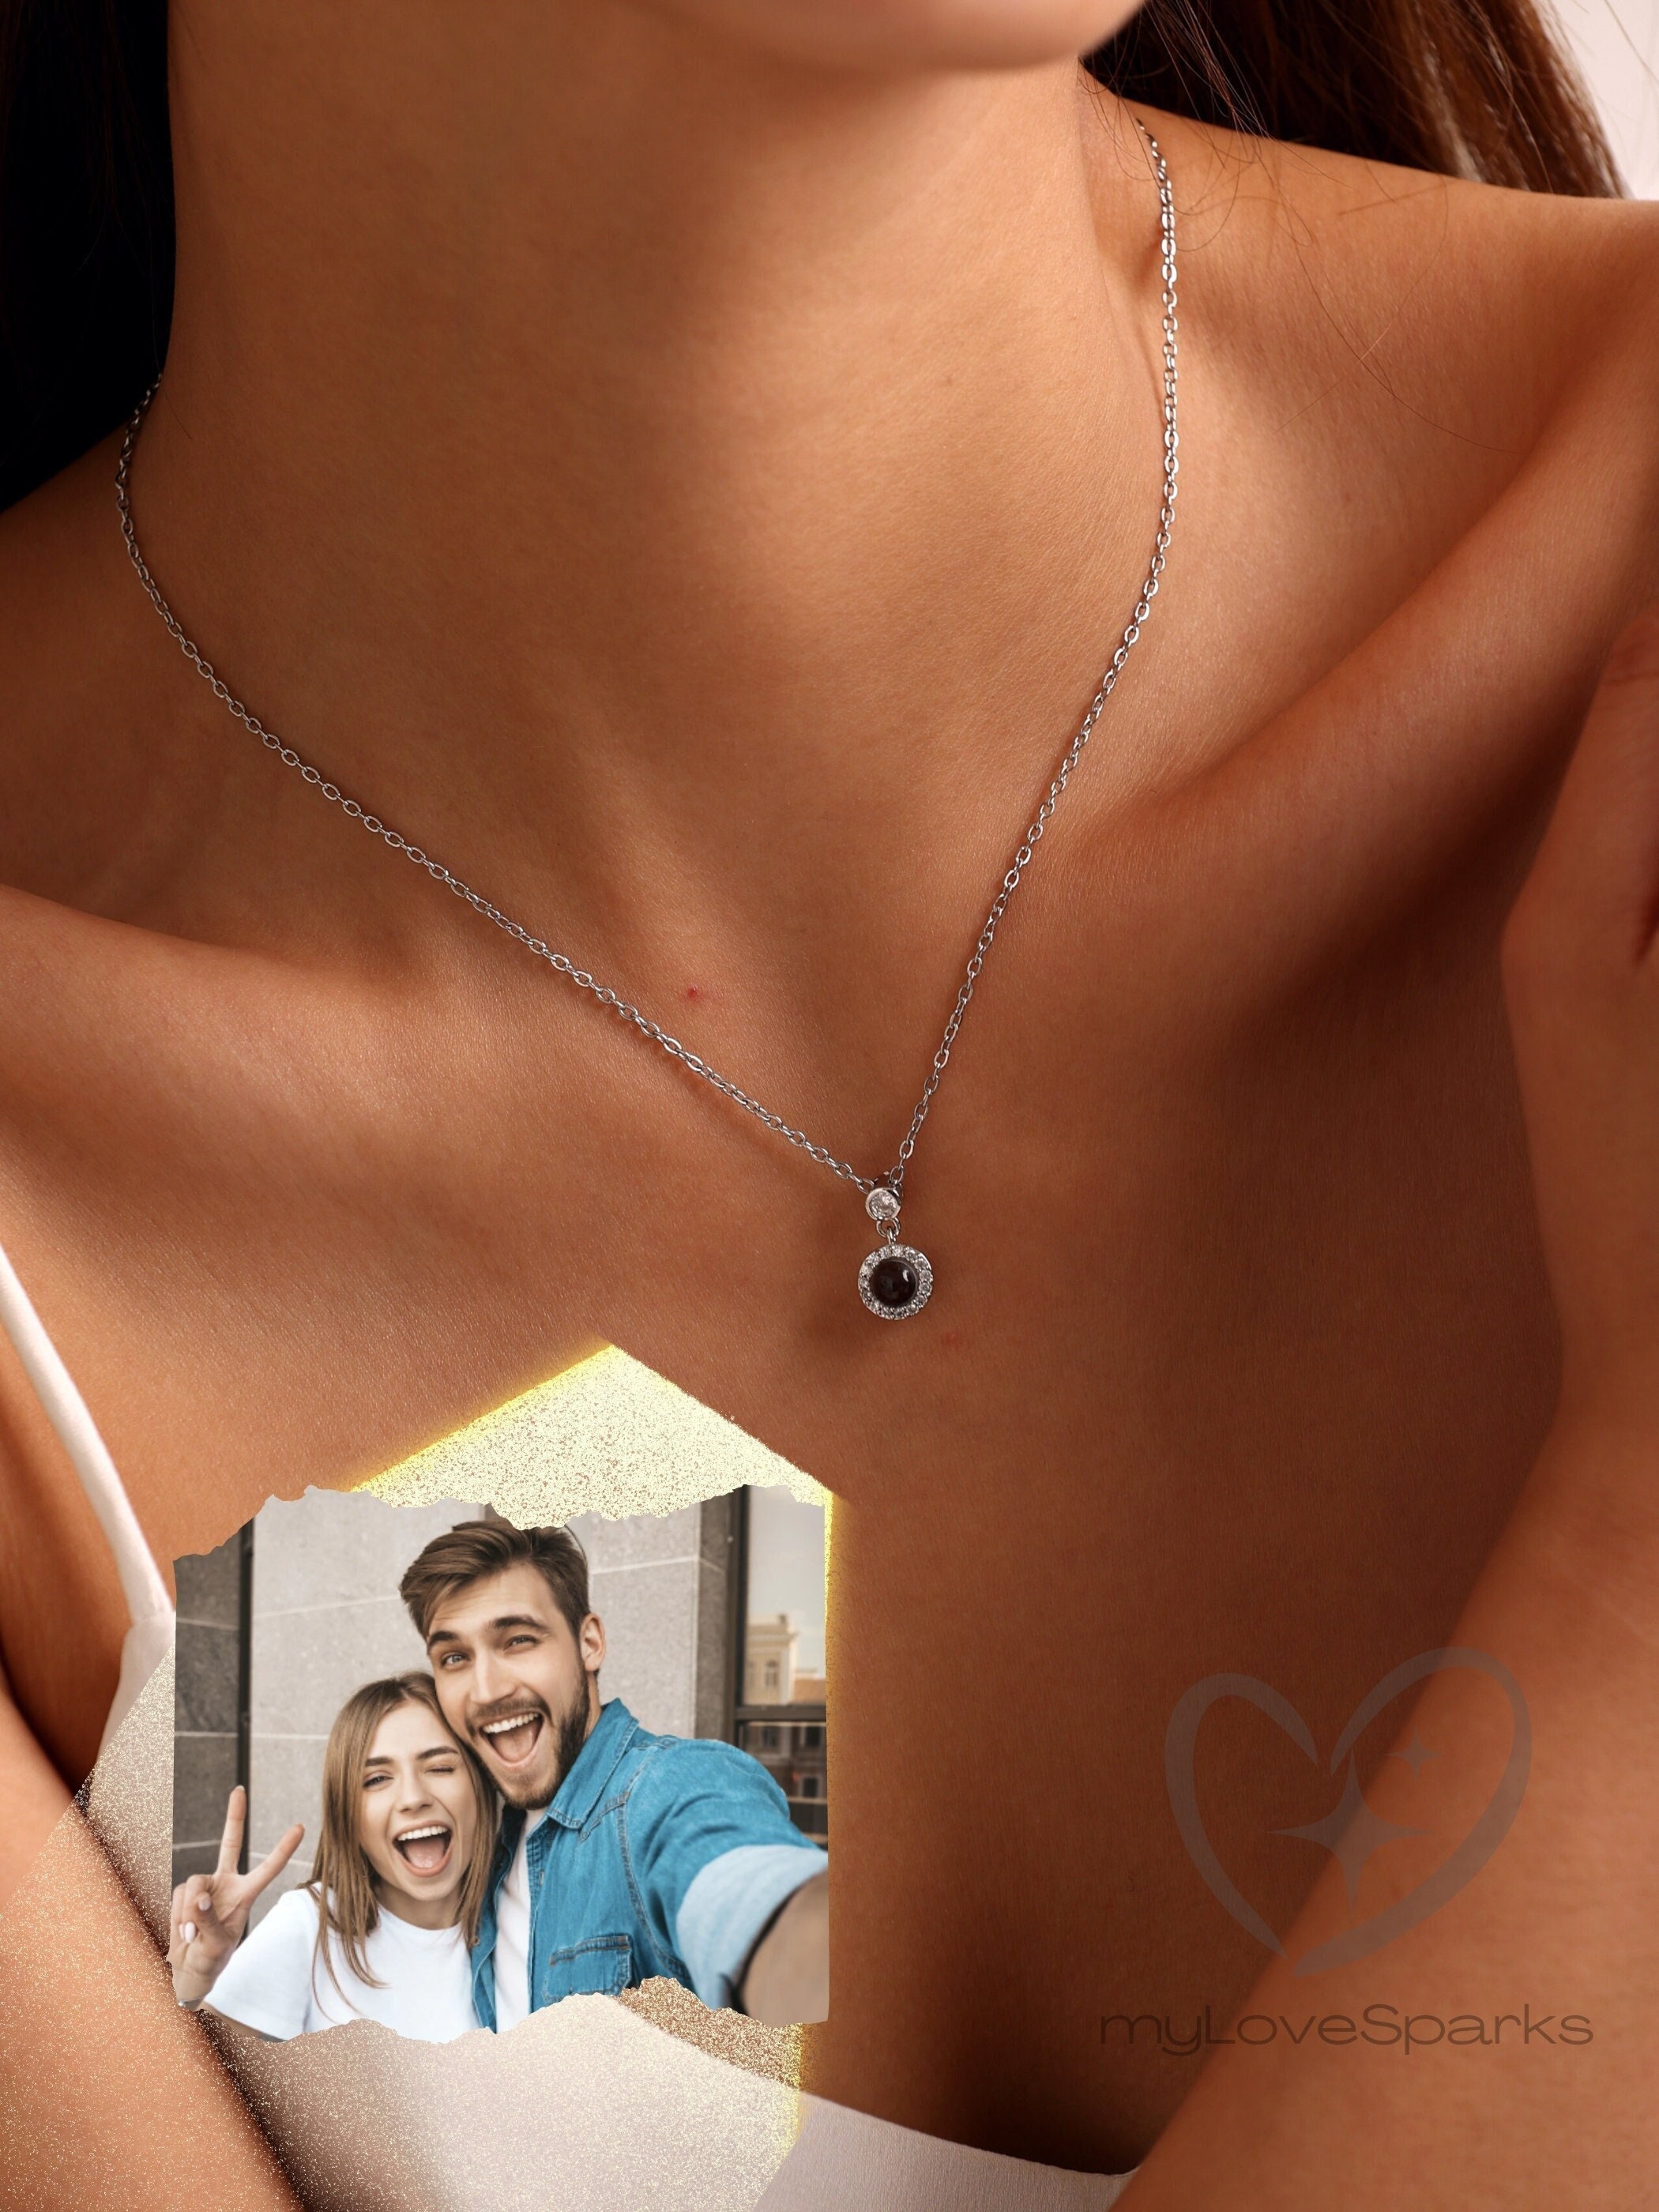 Buy myaddiction Pendant Necklace 100 Languages Projection Necklace for Wife  Boyfriend Lovers gold Jewelry & Watches | Fashion Jewelry | Necklaces &  Pendants at Amazon.in